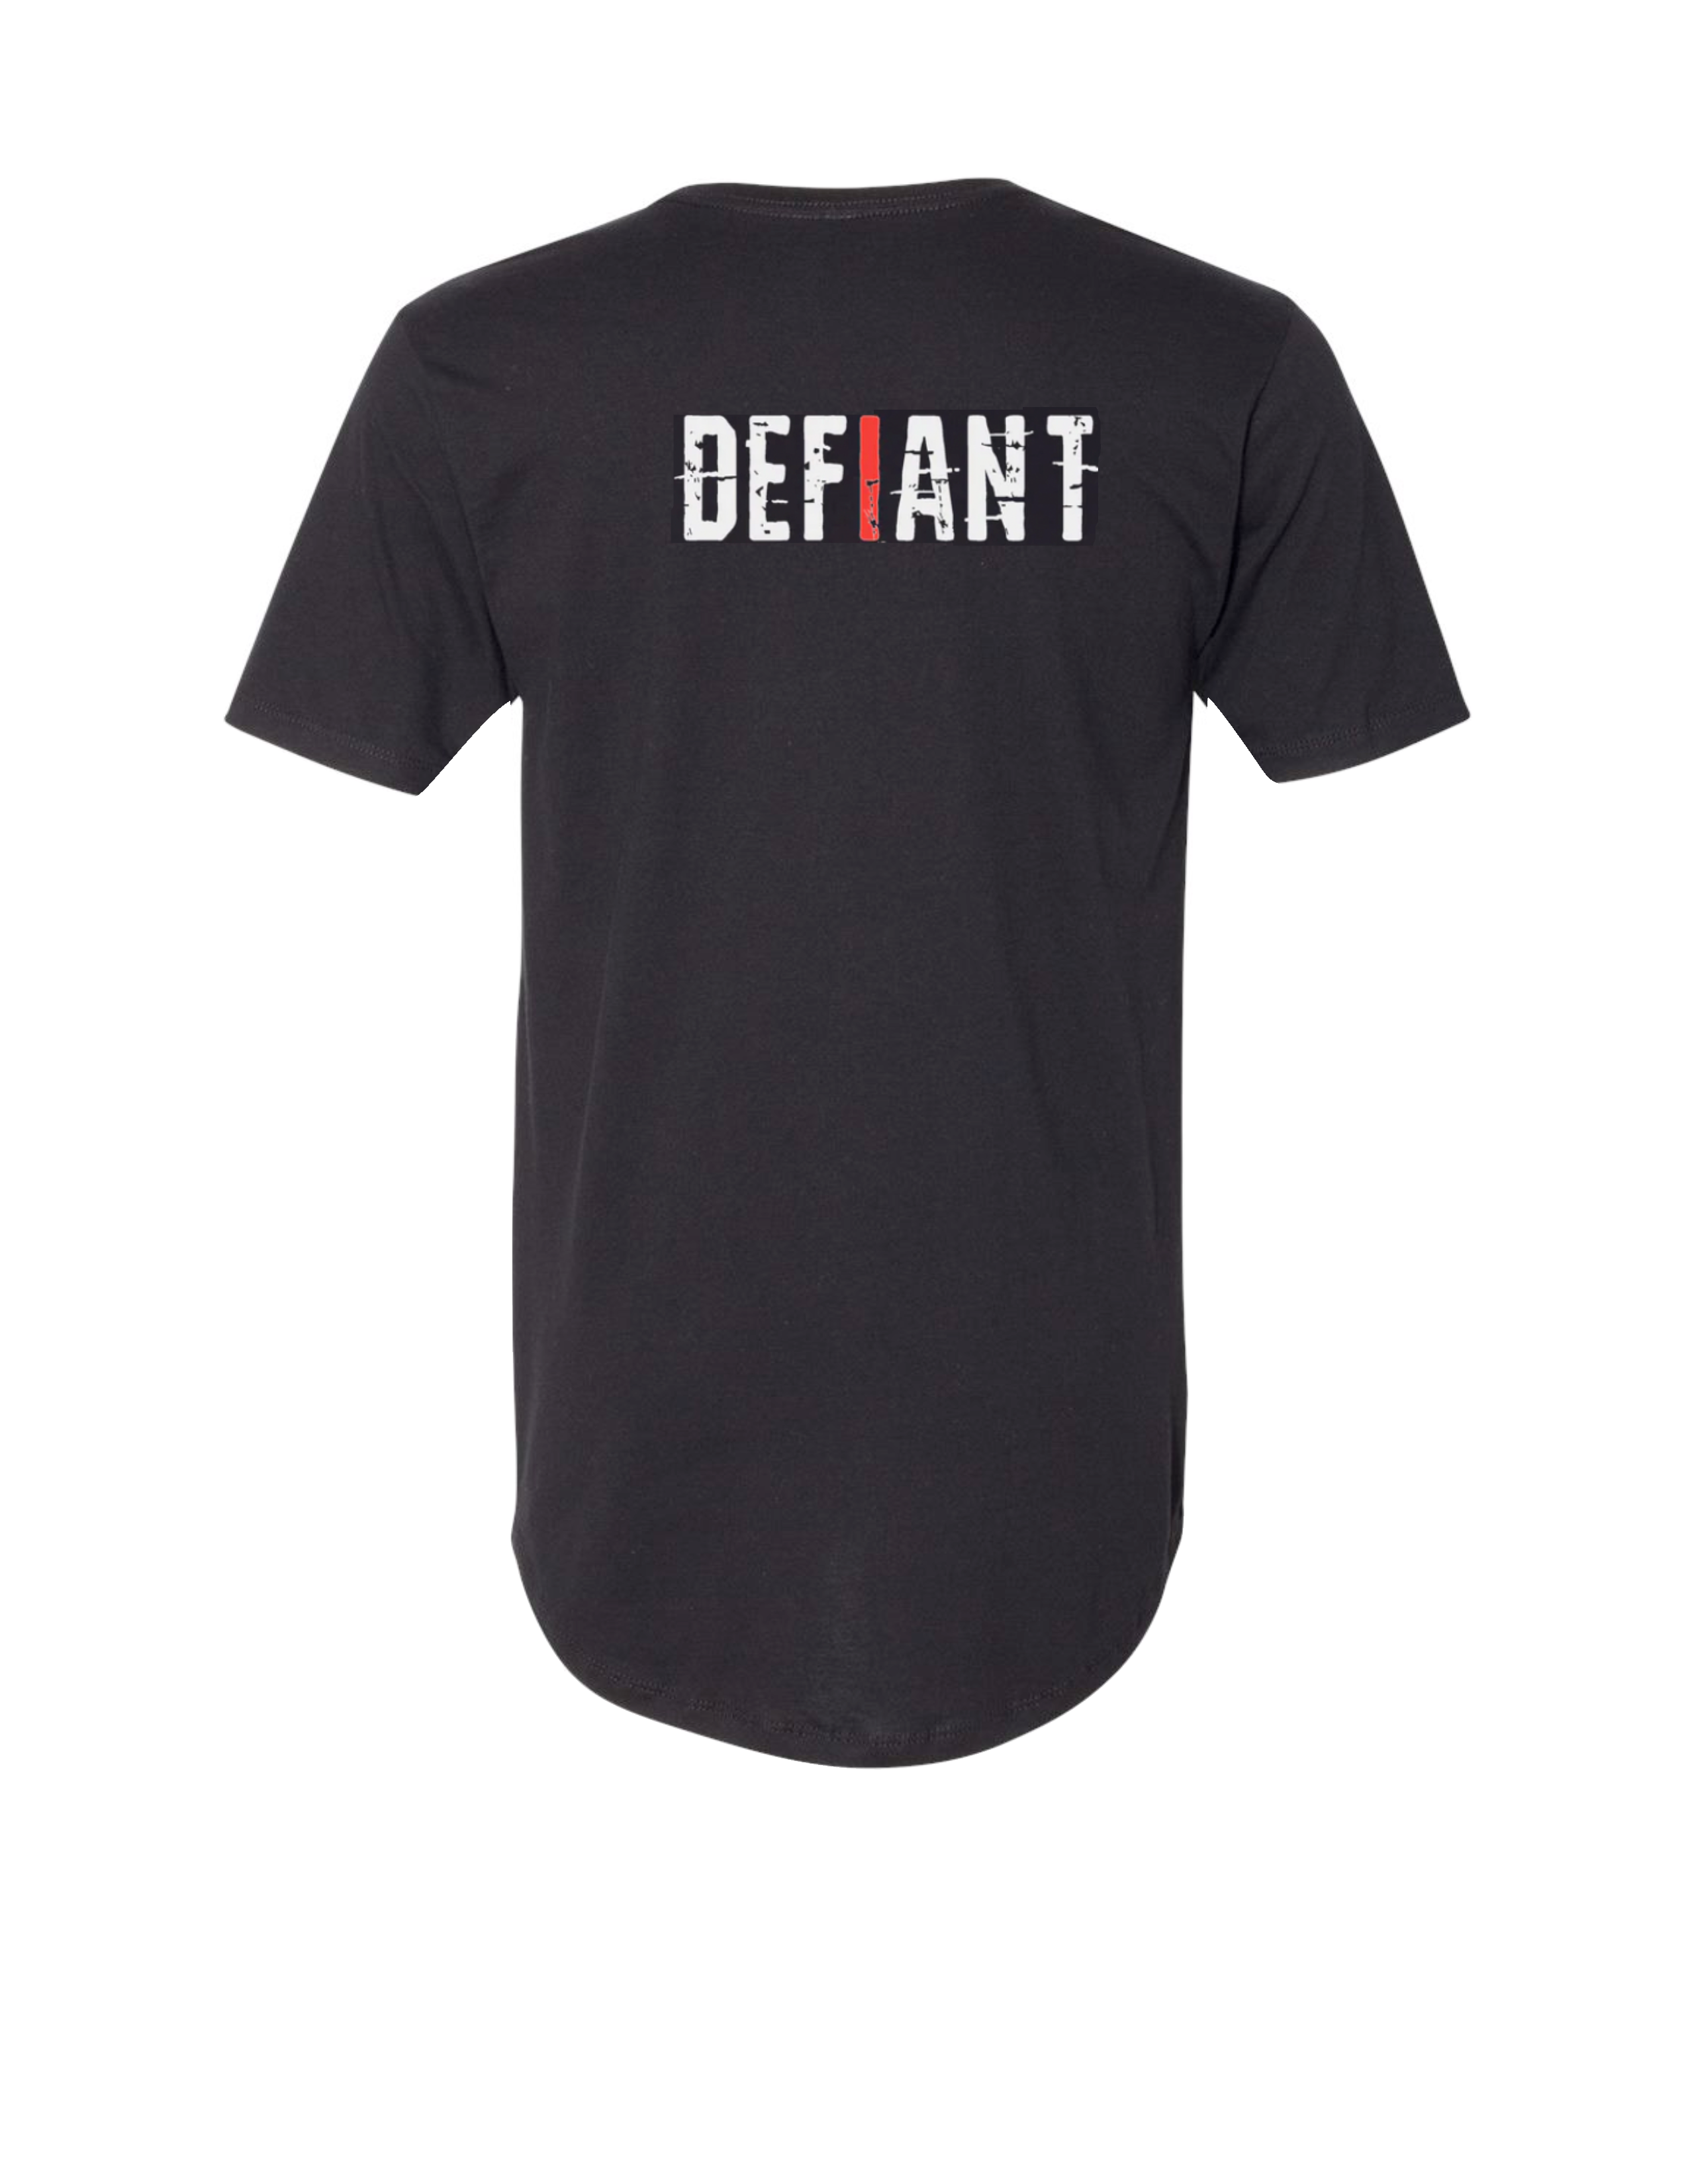 LONGER SHIRTS - LIMITED RUN - DEFIANT: STRONG STANDS APART!